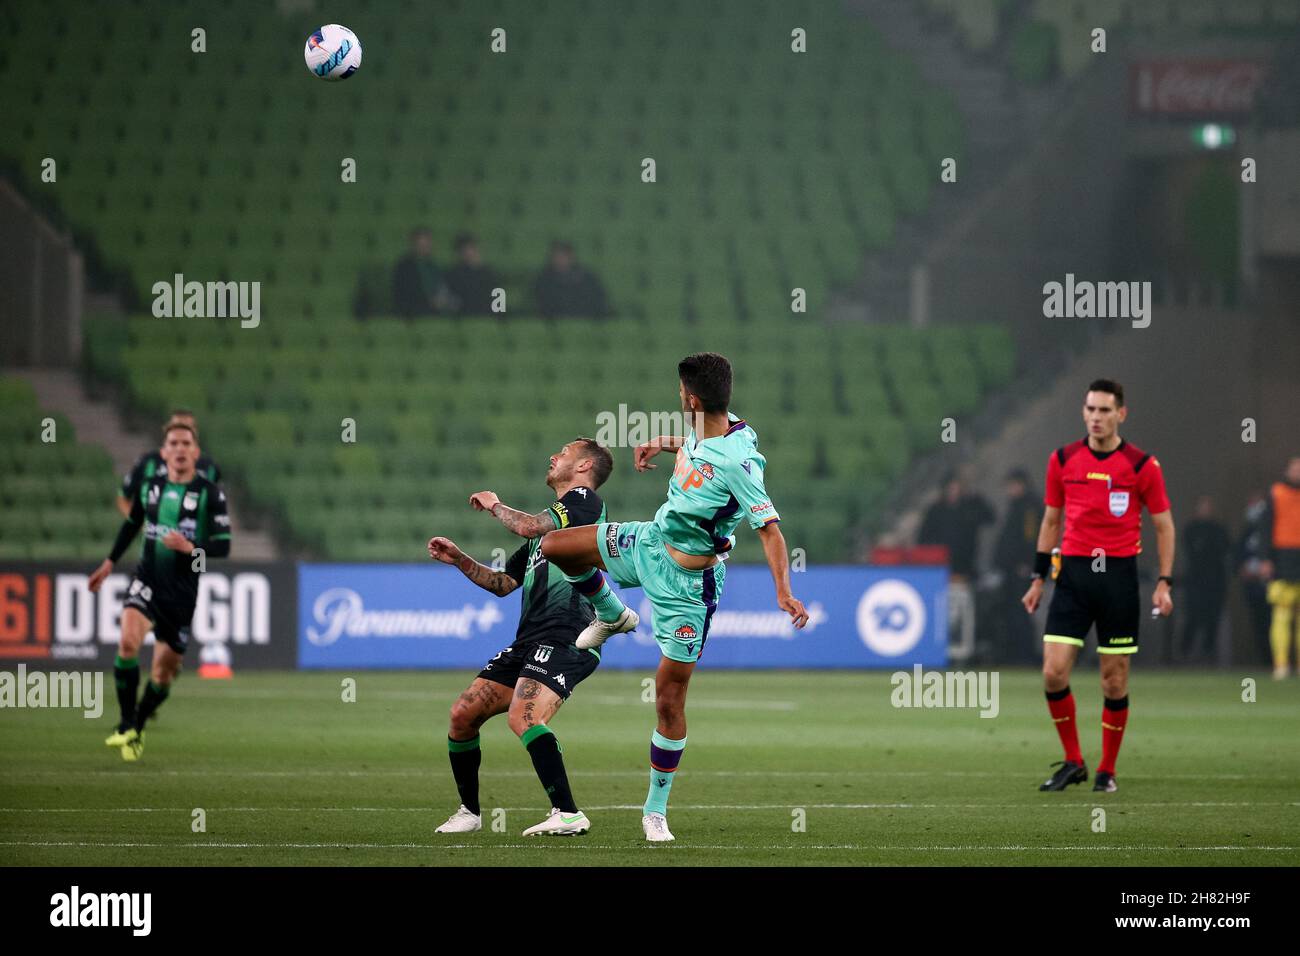 Melbourne, Australia, 26 November, 2021. Jonathan Aspropotamitis of Perth Glory kicks the ball during the round 2 A-League soccer match between Western United FC and Perth Glory at AAMI Park on November 26, 2021 in Melbourne, Australia. Credit: Dave Hewison/Speed Media/Alamy Live News Stock Photo